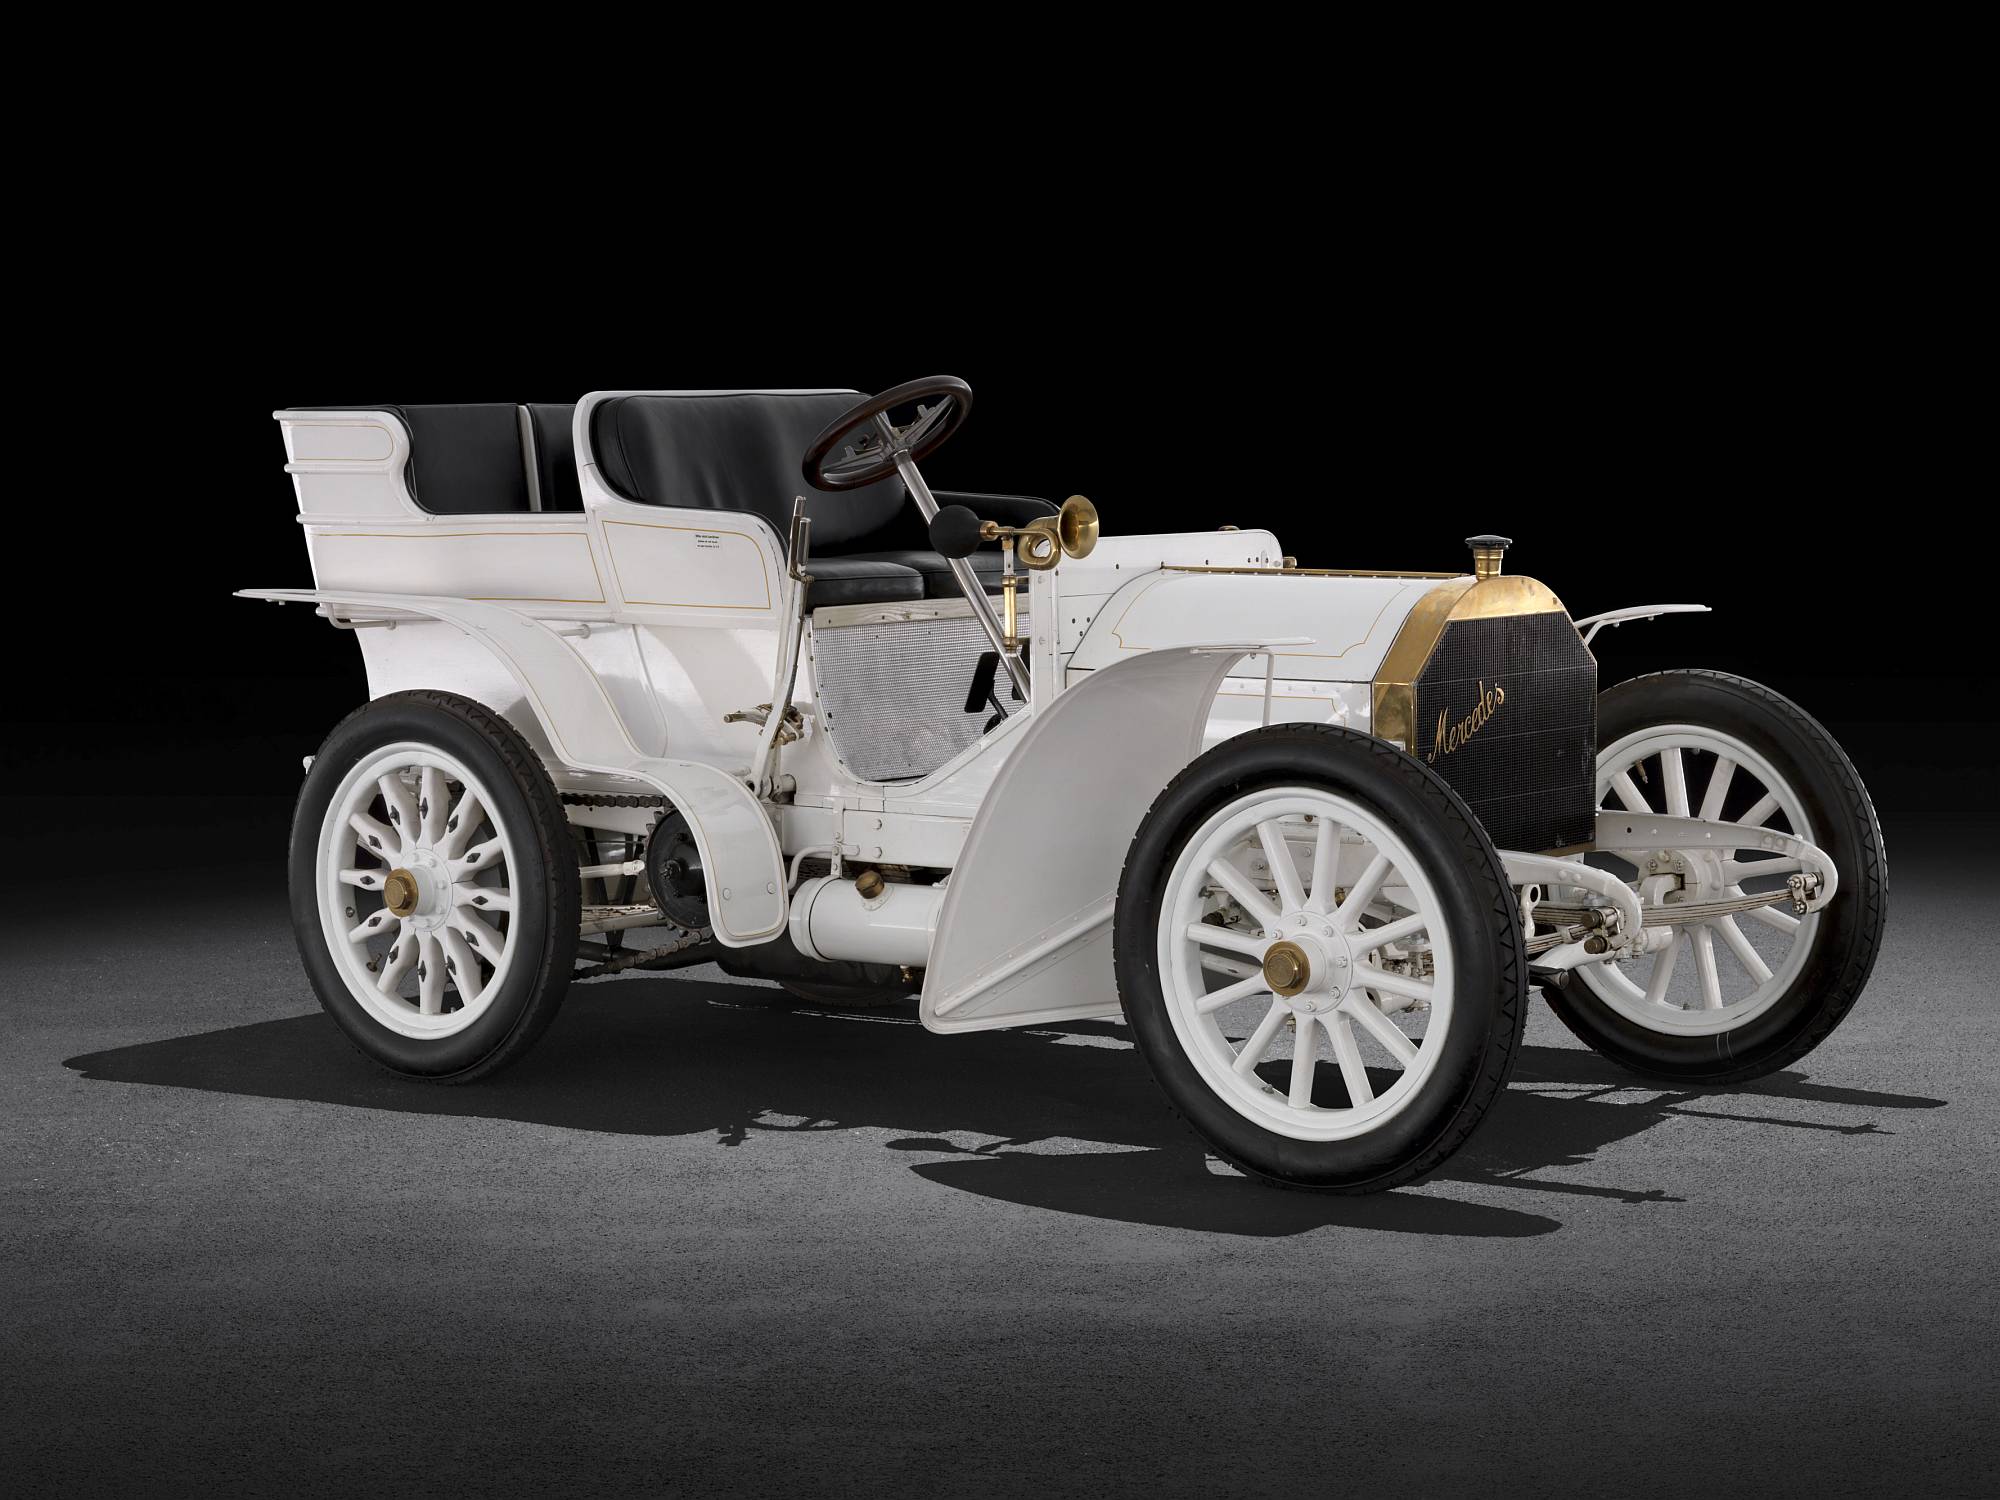 „Mercedes“: Marke mit Strahlkraft seit 120 Jahren “Mercedes”: the brand name that has shone out for over 120 years